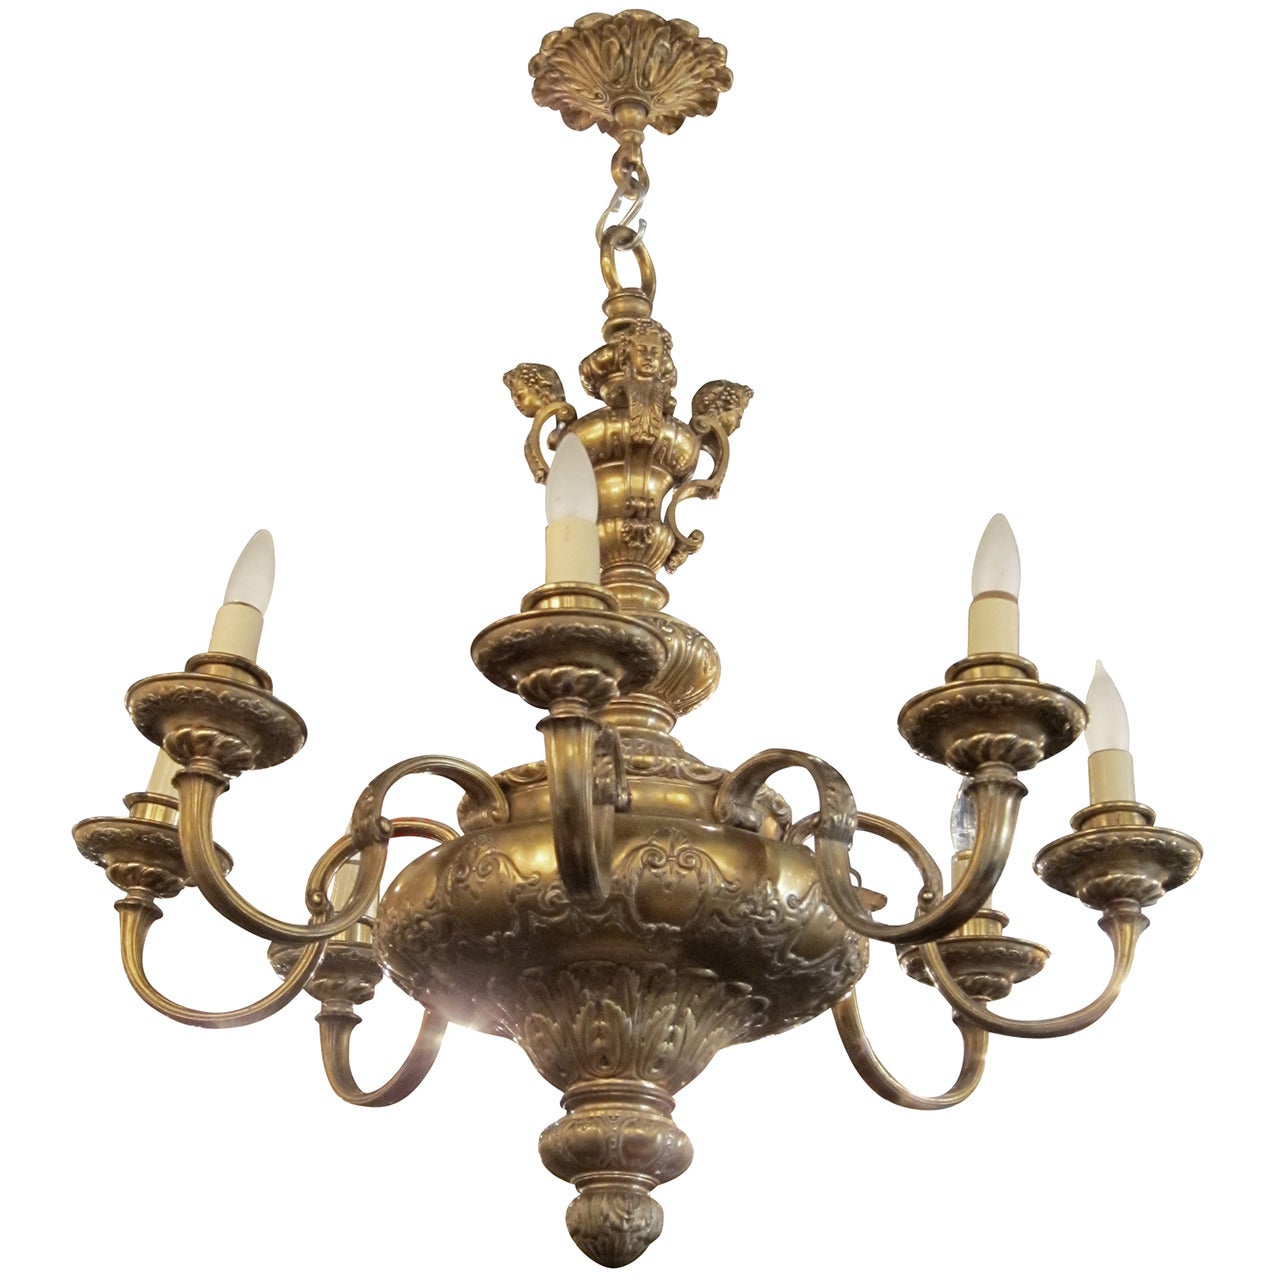 1900s French Made Gold-Plated Eight-Arm Chandelier with Cherub Relief Work